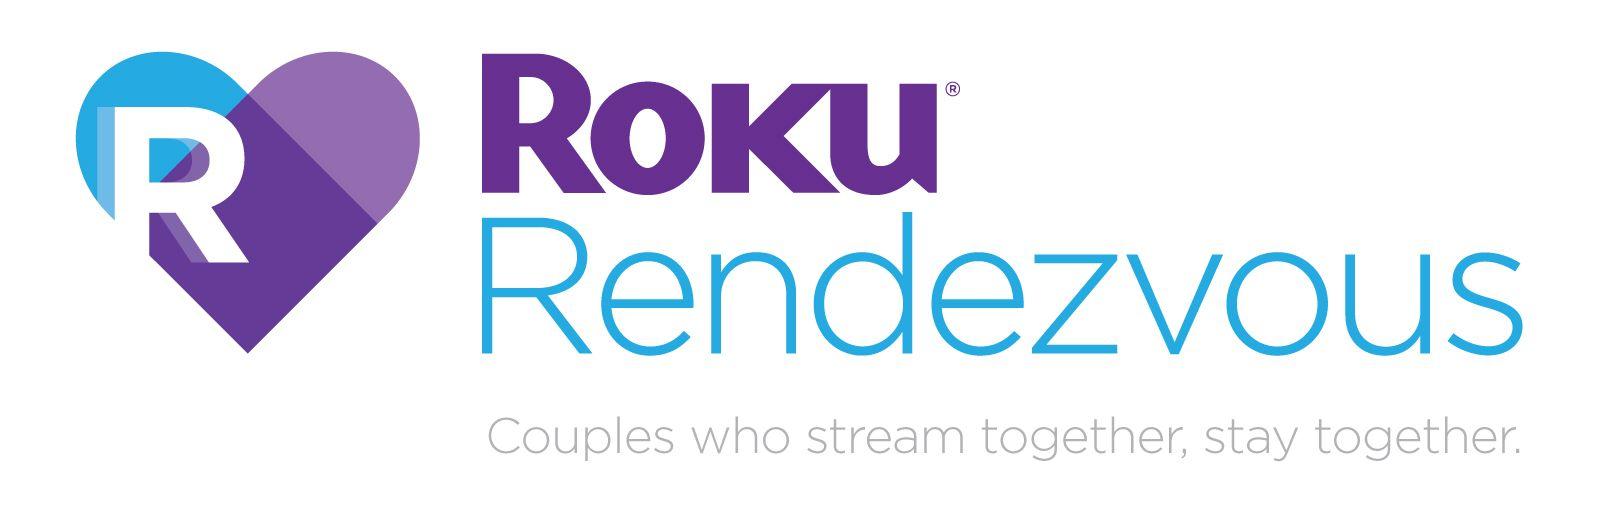 Roku.com Logo - Introducing Roku Rendezvous™ – New Dating Channel for Single ...